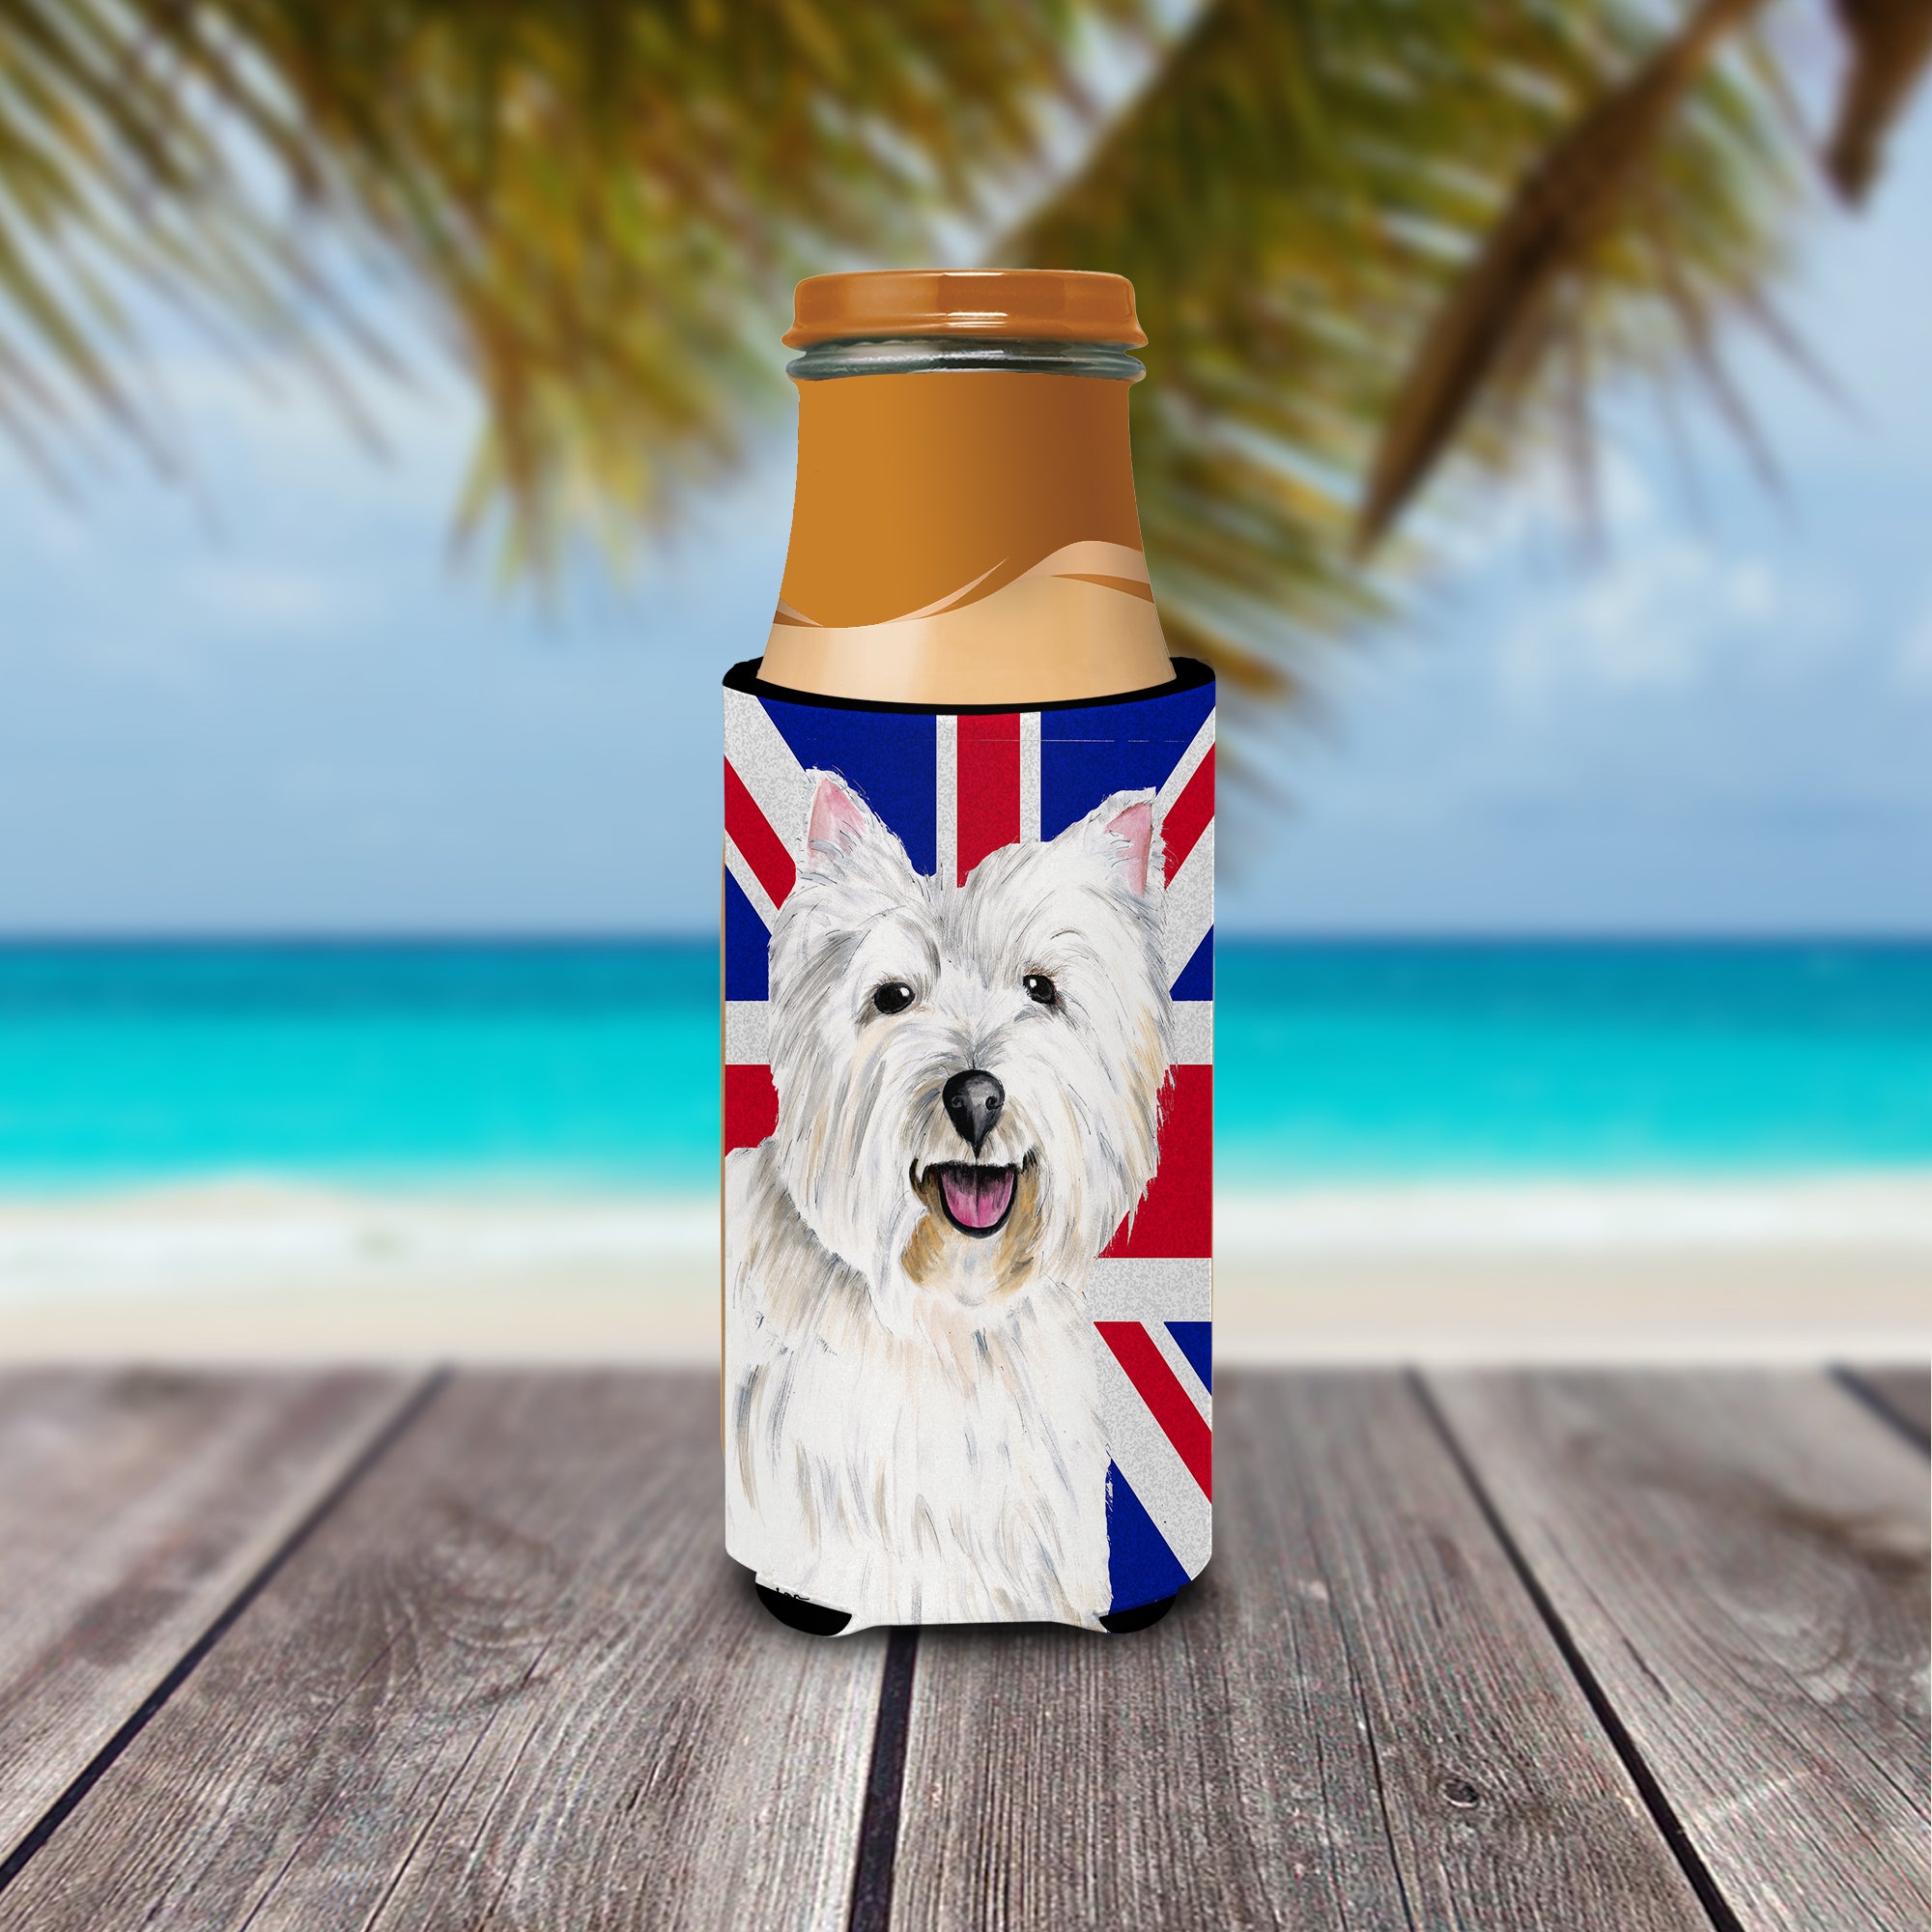 Westie with English Union Jack British Flag Ultra Beverage Insulators for slim cans SC9827MUK